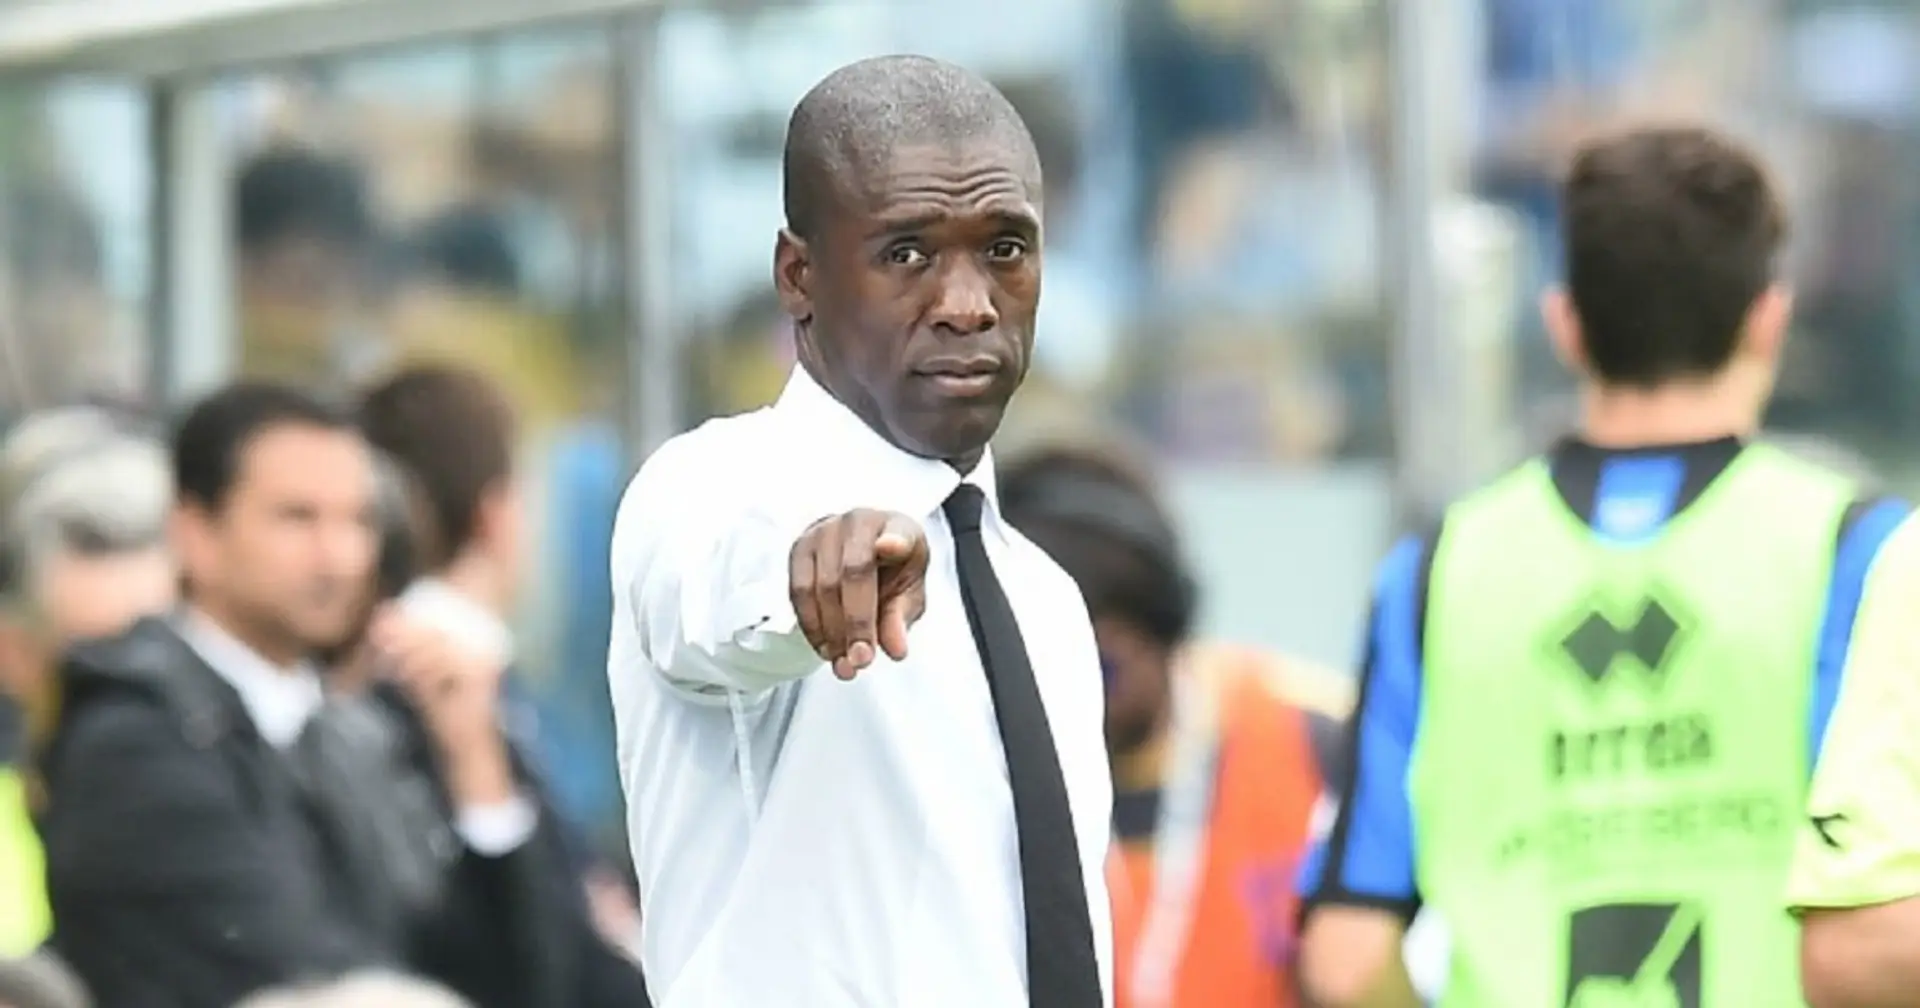 'There are no Black people in positions of greatest power': Seedorf slams racial bias in football